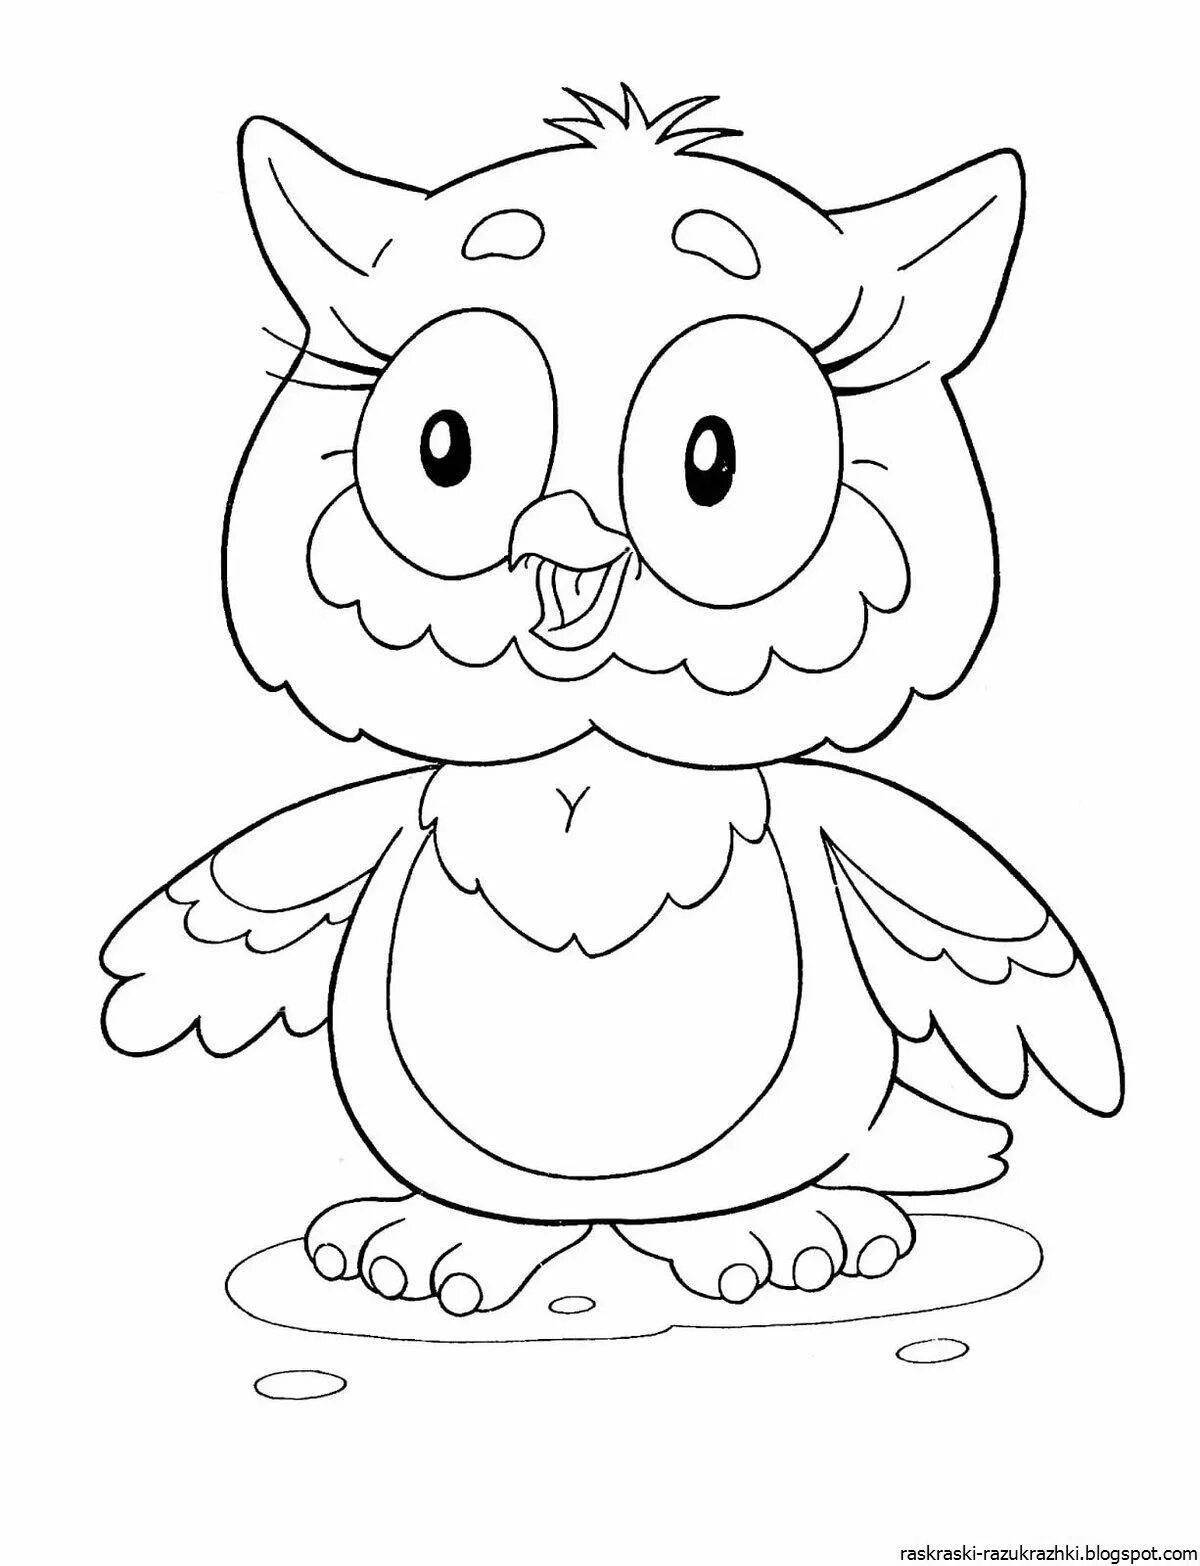 Adorable animal coloring pages for kids 3 4